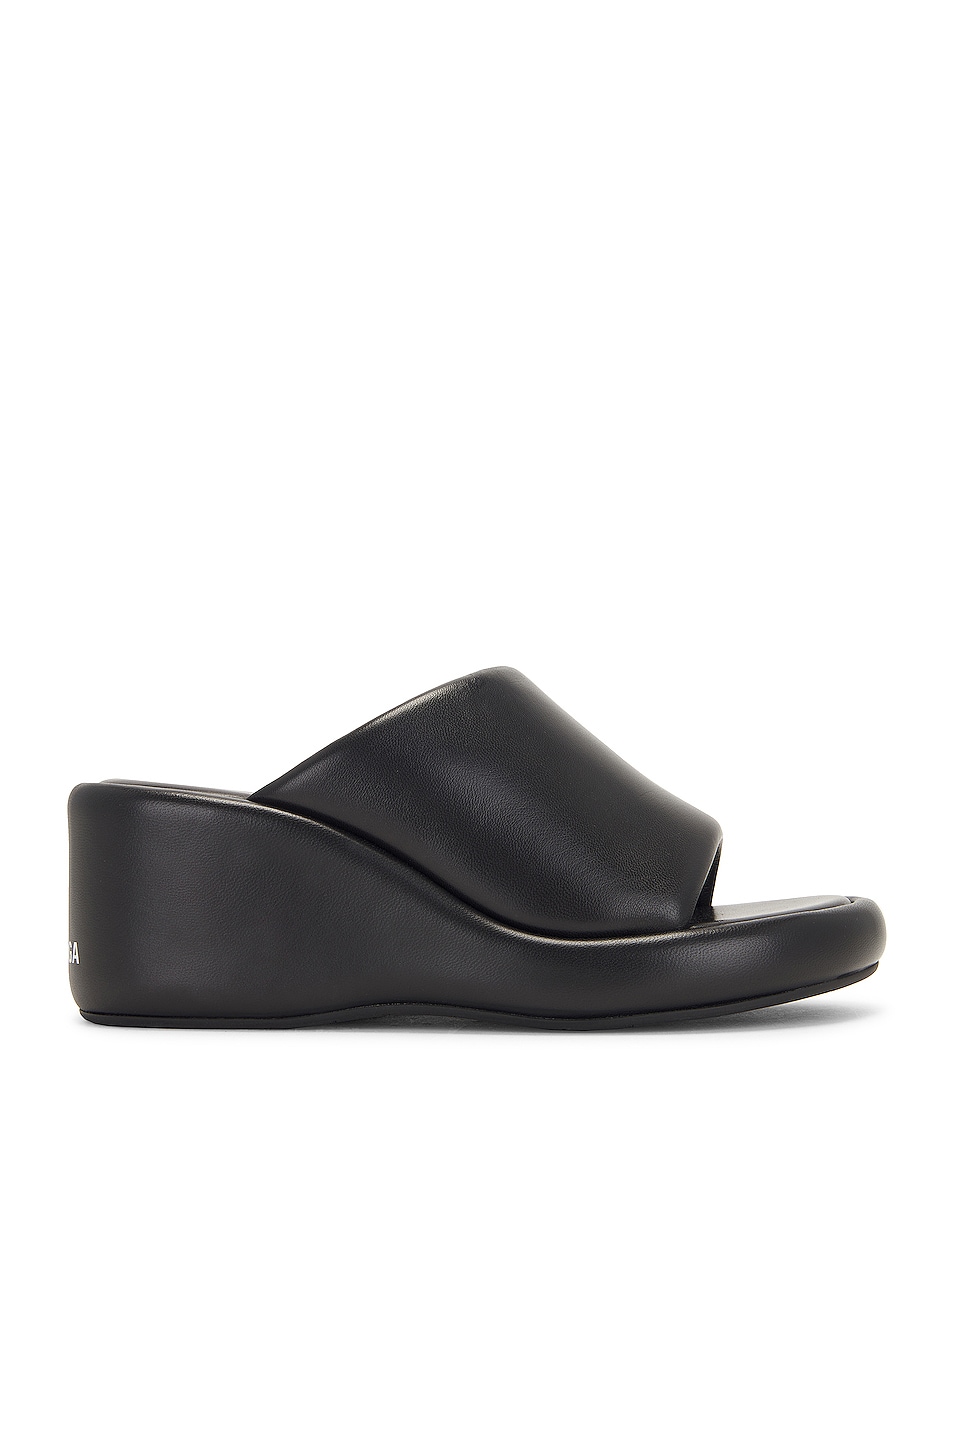 Image 1 of Balenciaga Rise Wedge Sandals in Black & White